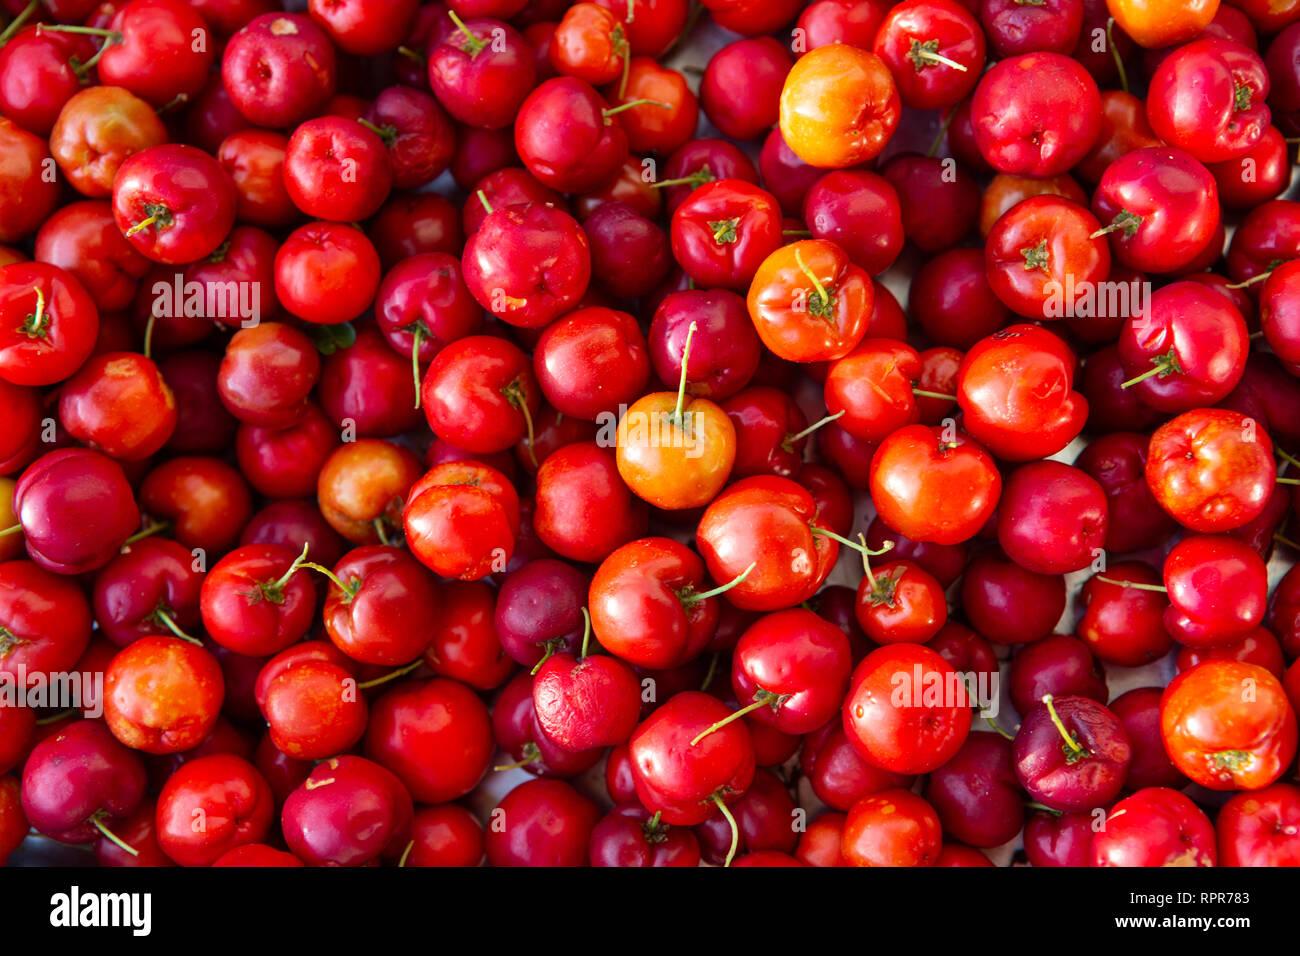 Close up of fresh 'Acerola' cherry fruits. The acerola juice contains 40 to 80 times more vitamin 'C' than lemon or orange juice. Stock Photo